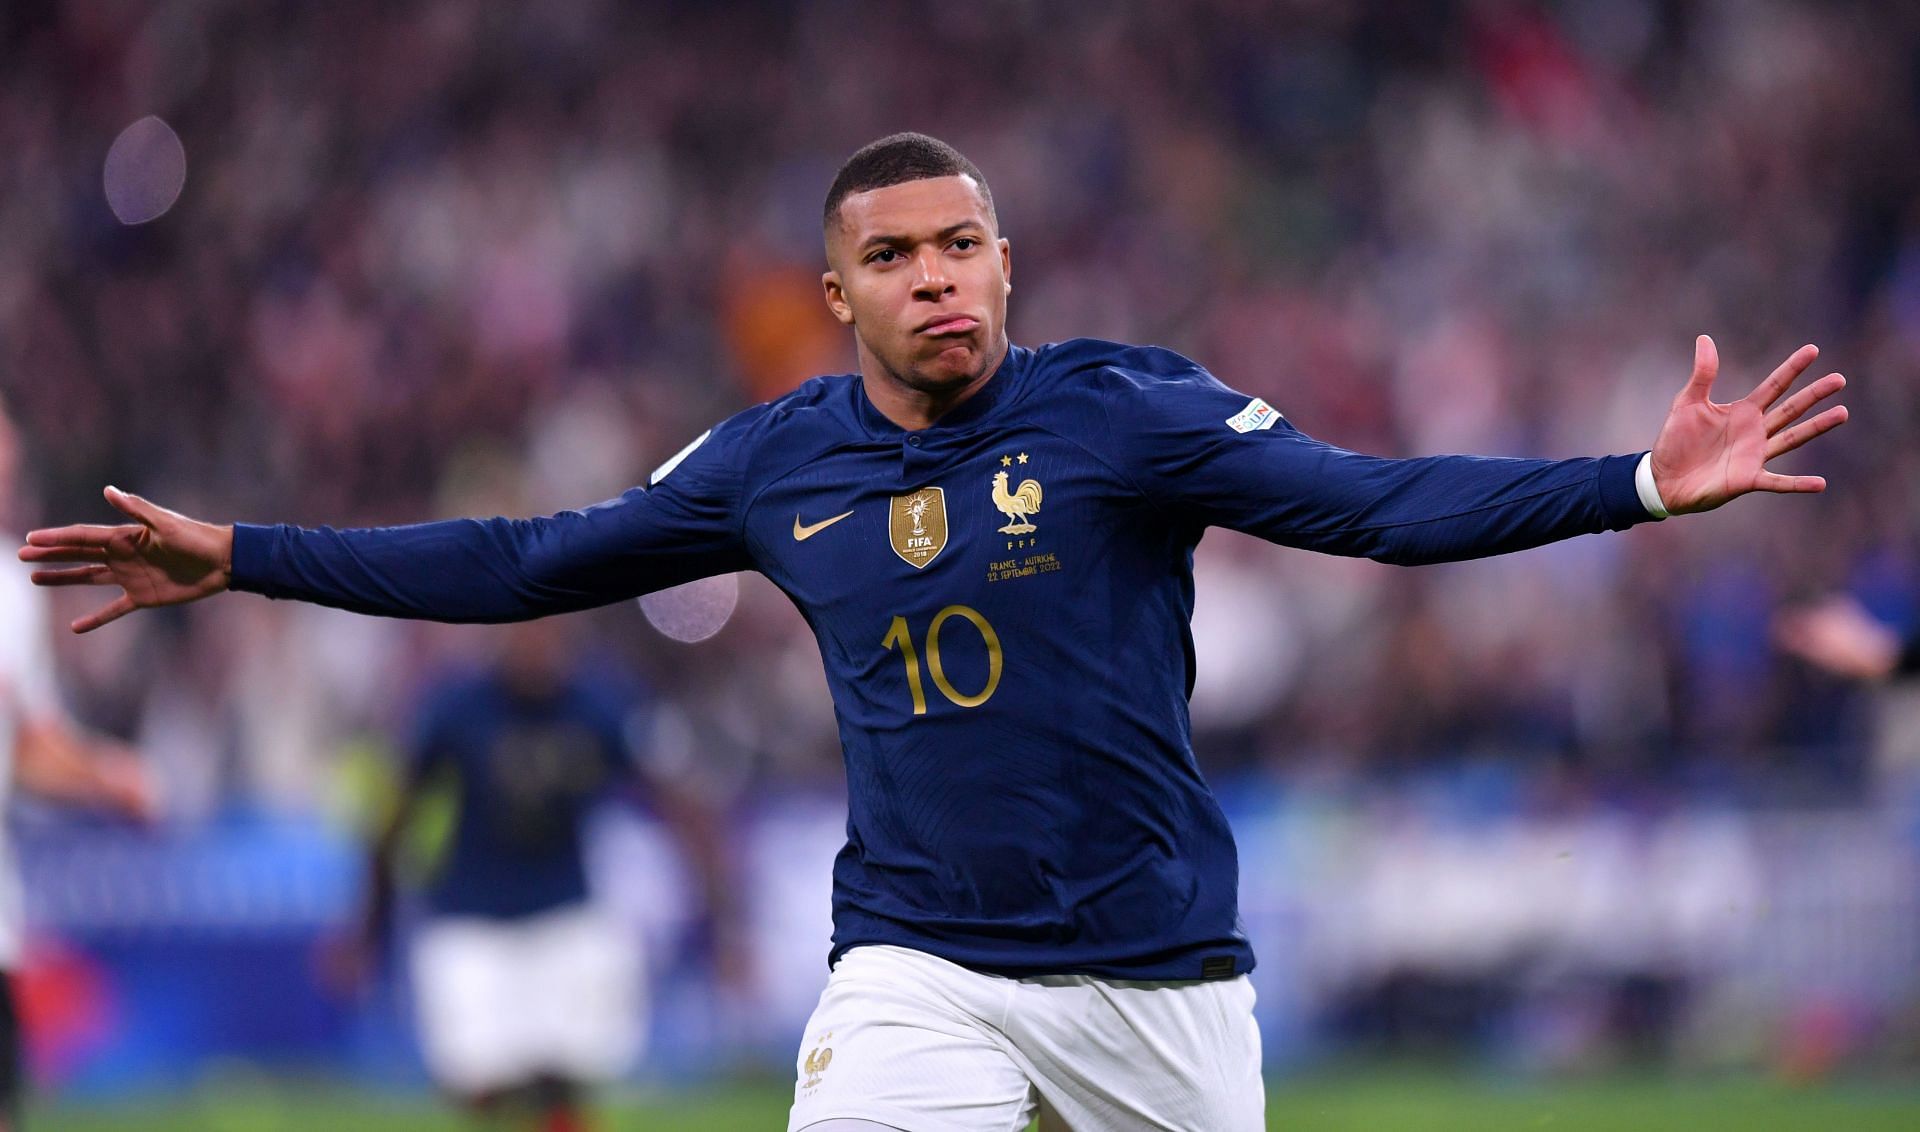 “My next chapter will be very exciting” - Kylian Mbappe makes big claim on new club amid Real Madrid transfer rumors 